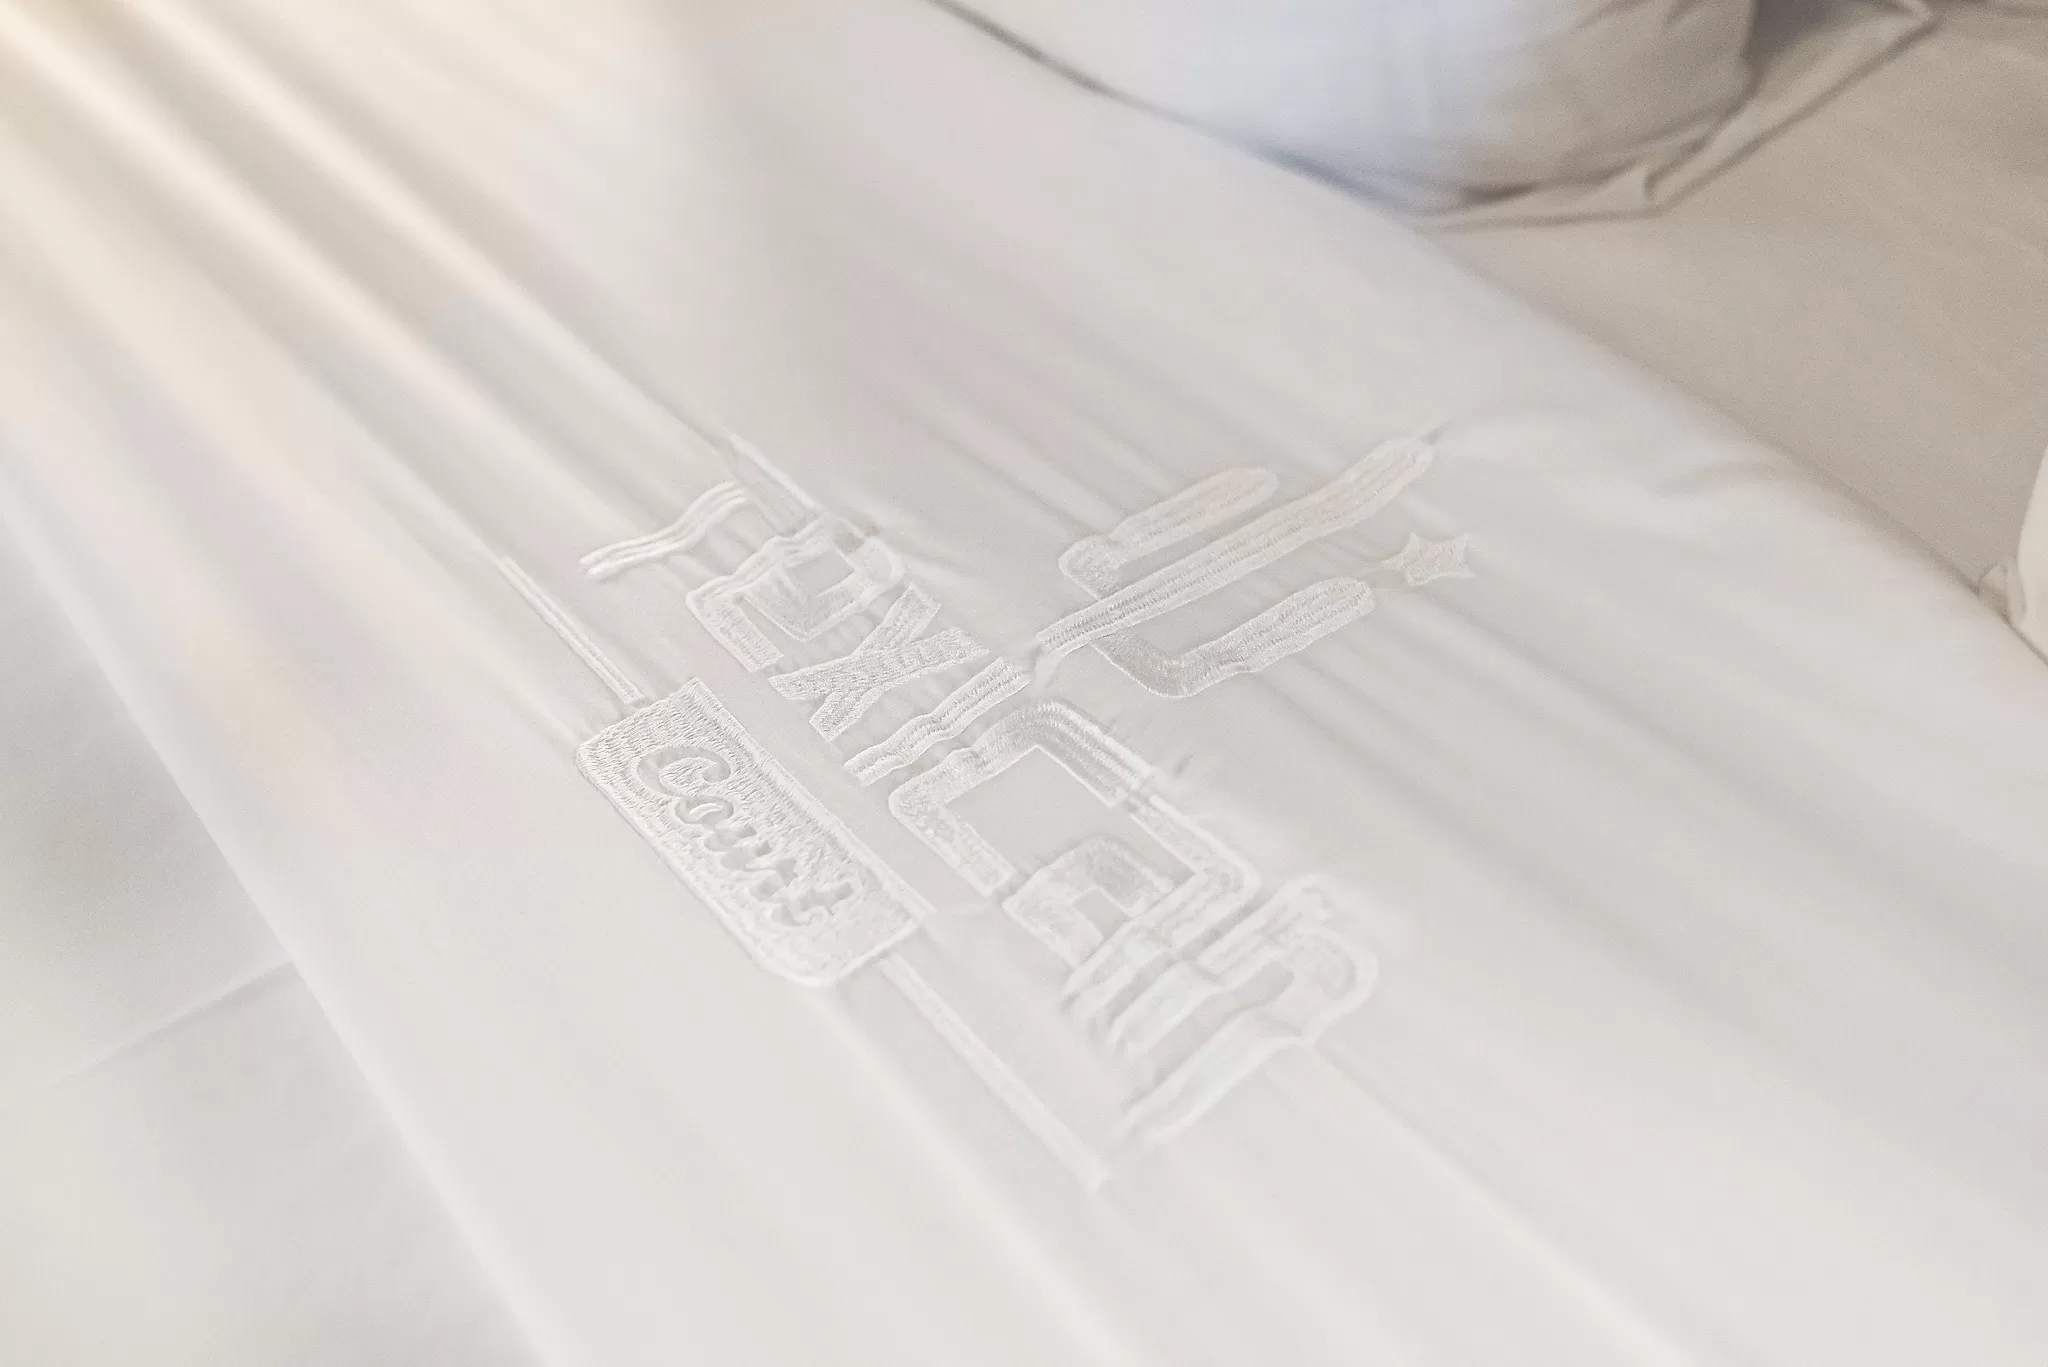 Bedding in a guestroom at the Texican Court Hotel